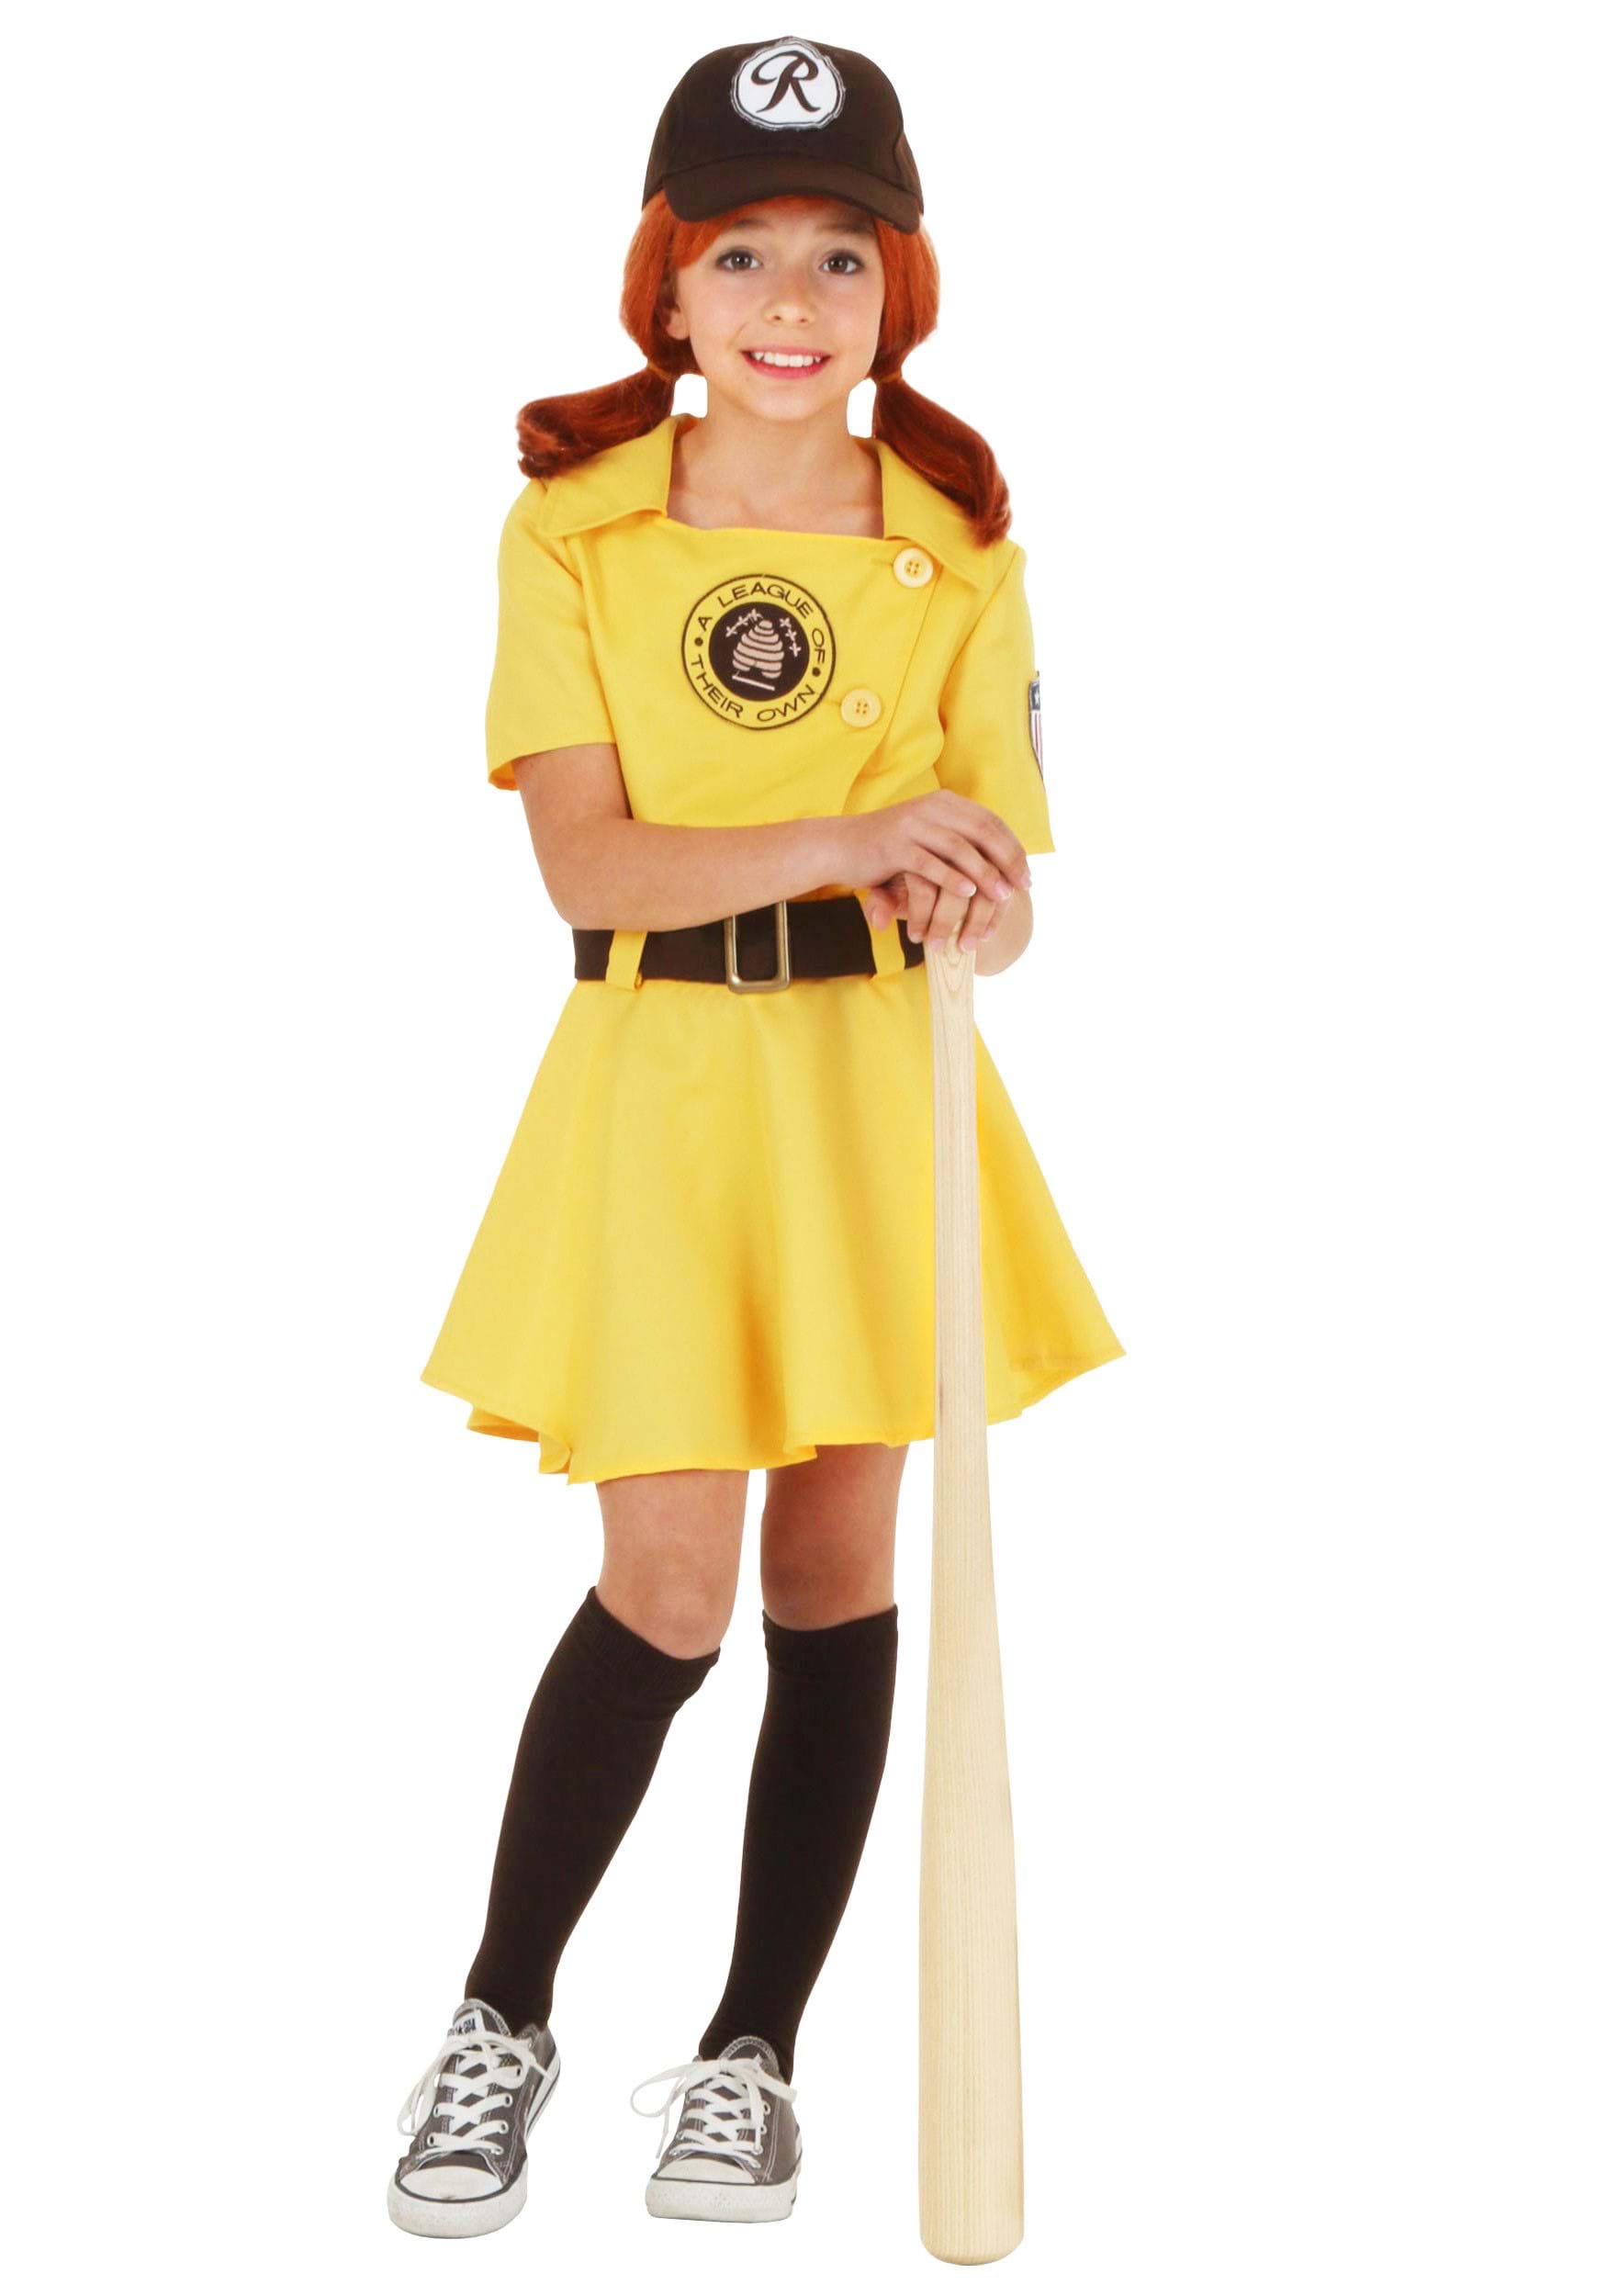 Photos - Fancy Dress League FUN Costumes Girls A  of Their Own Kit Costume | Baseball Costume Or 